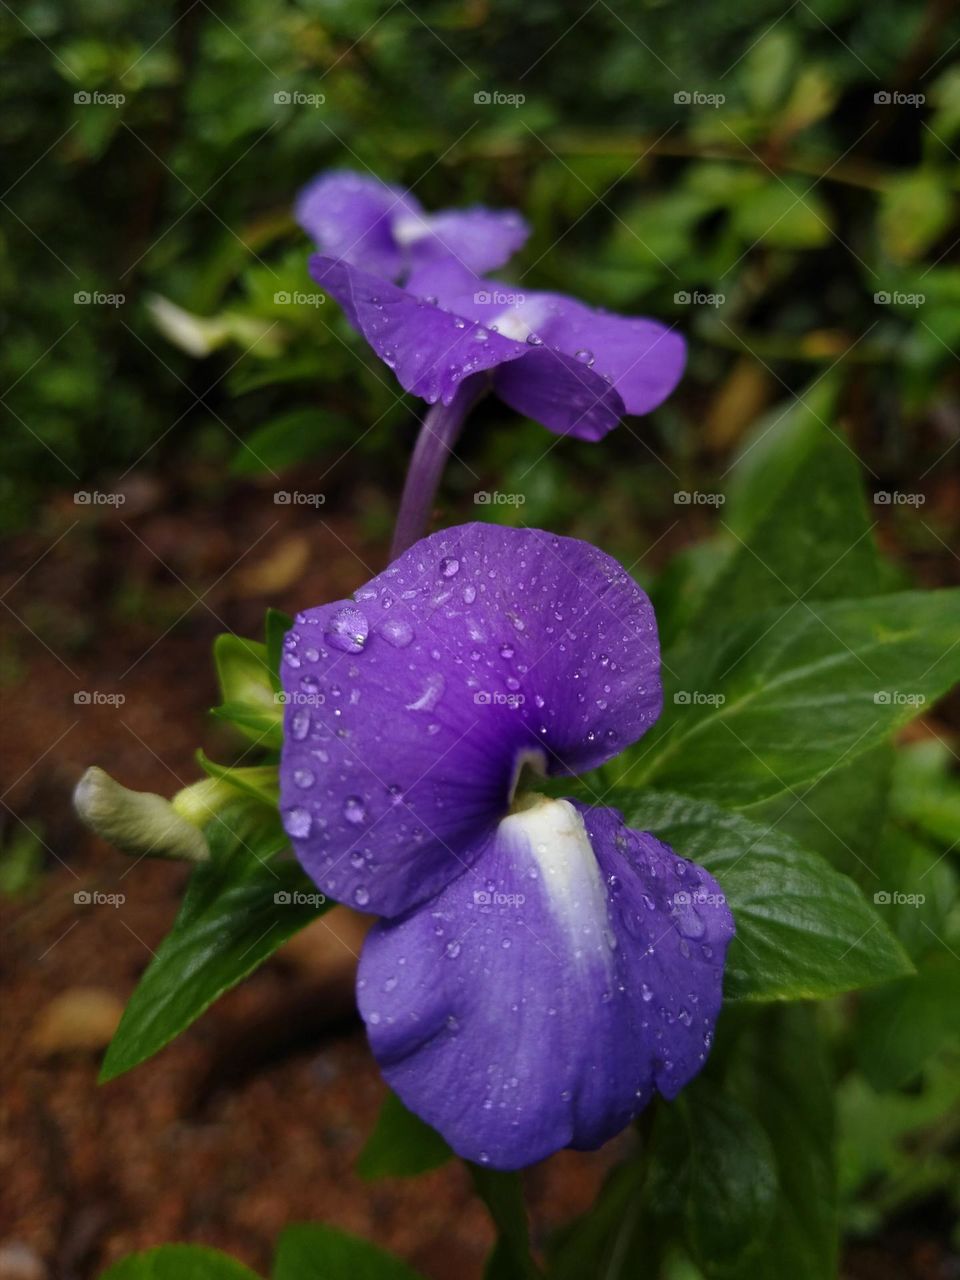 The flowers after rain.